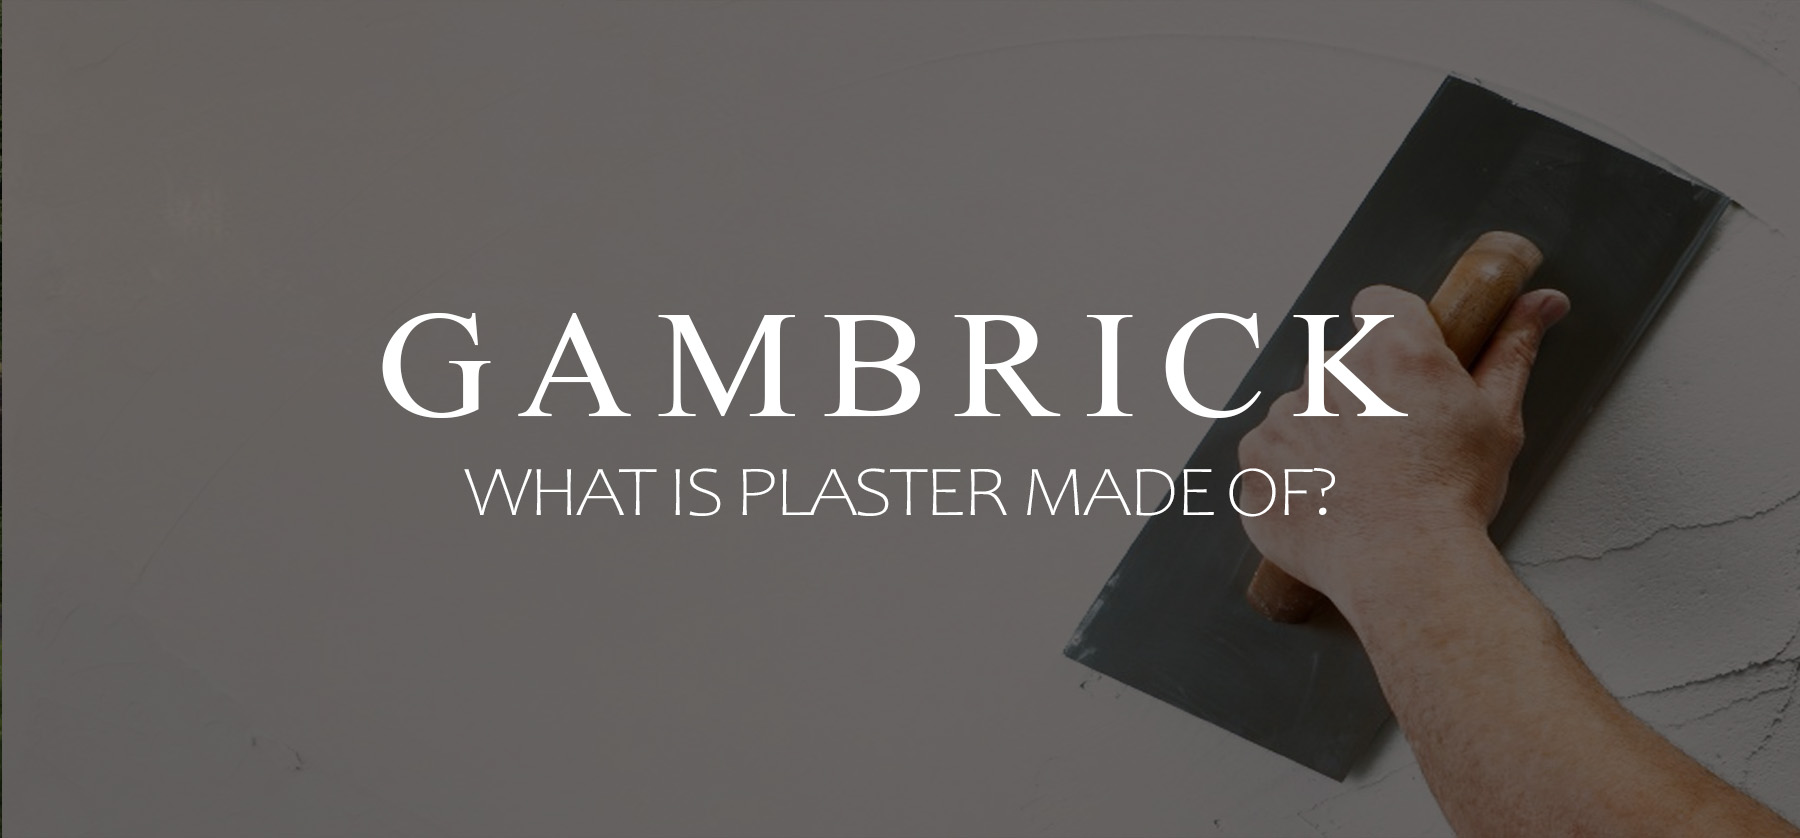 what is plaster made of banner